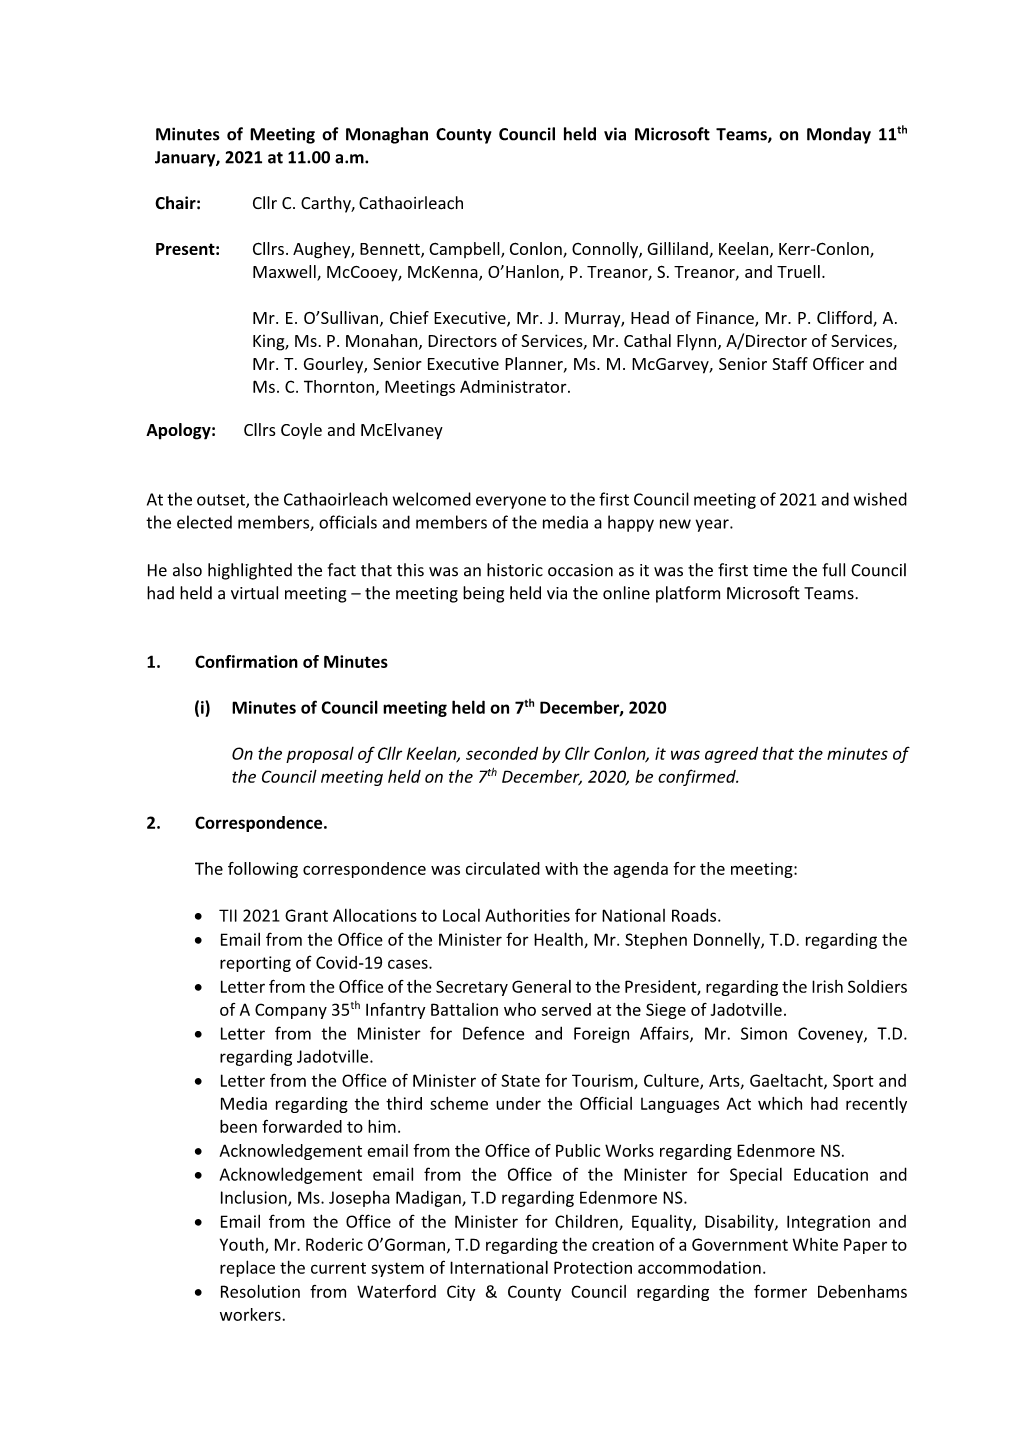 Council Meeting Minutes 11Th January 2021